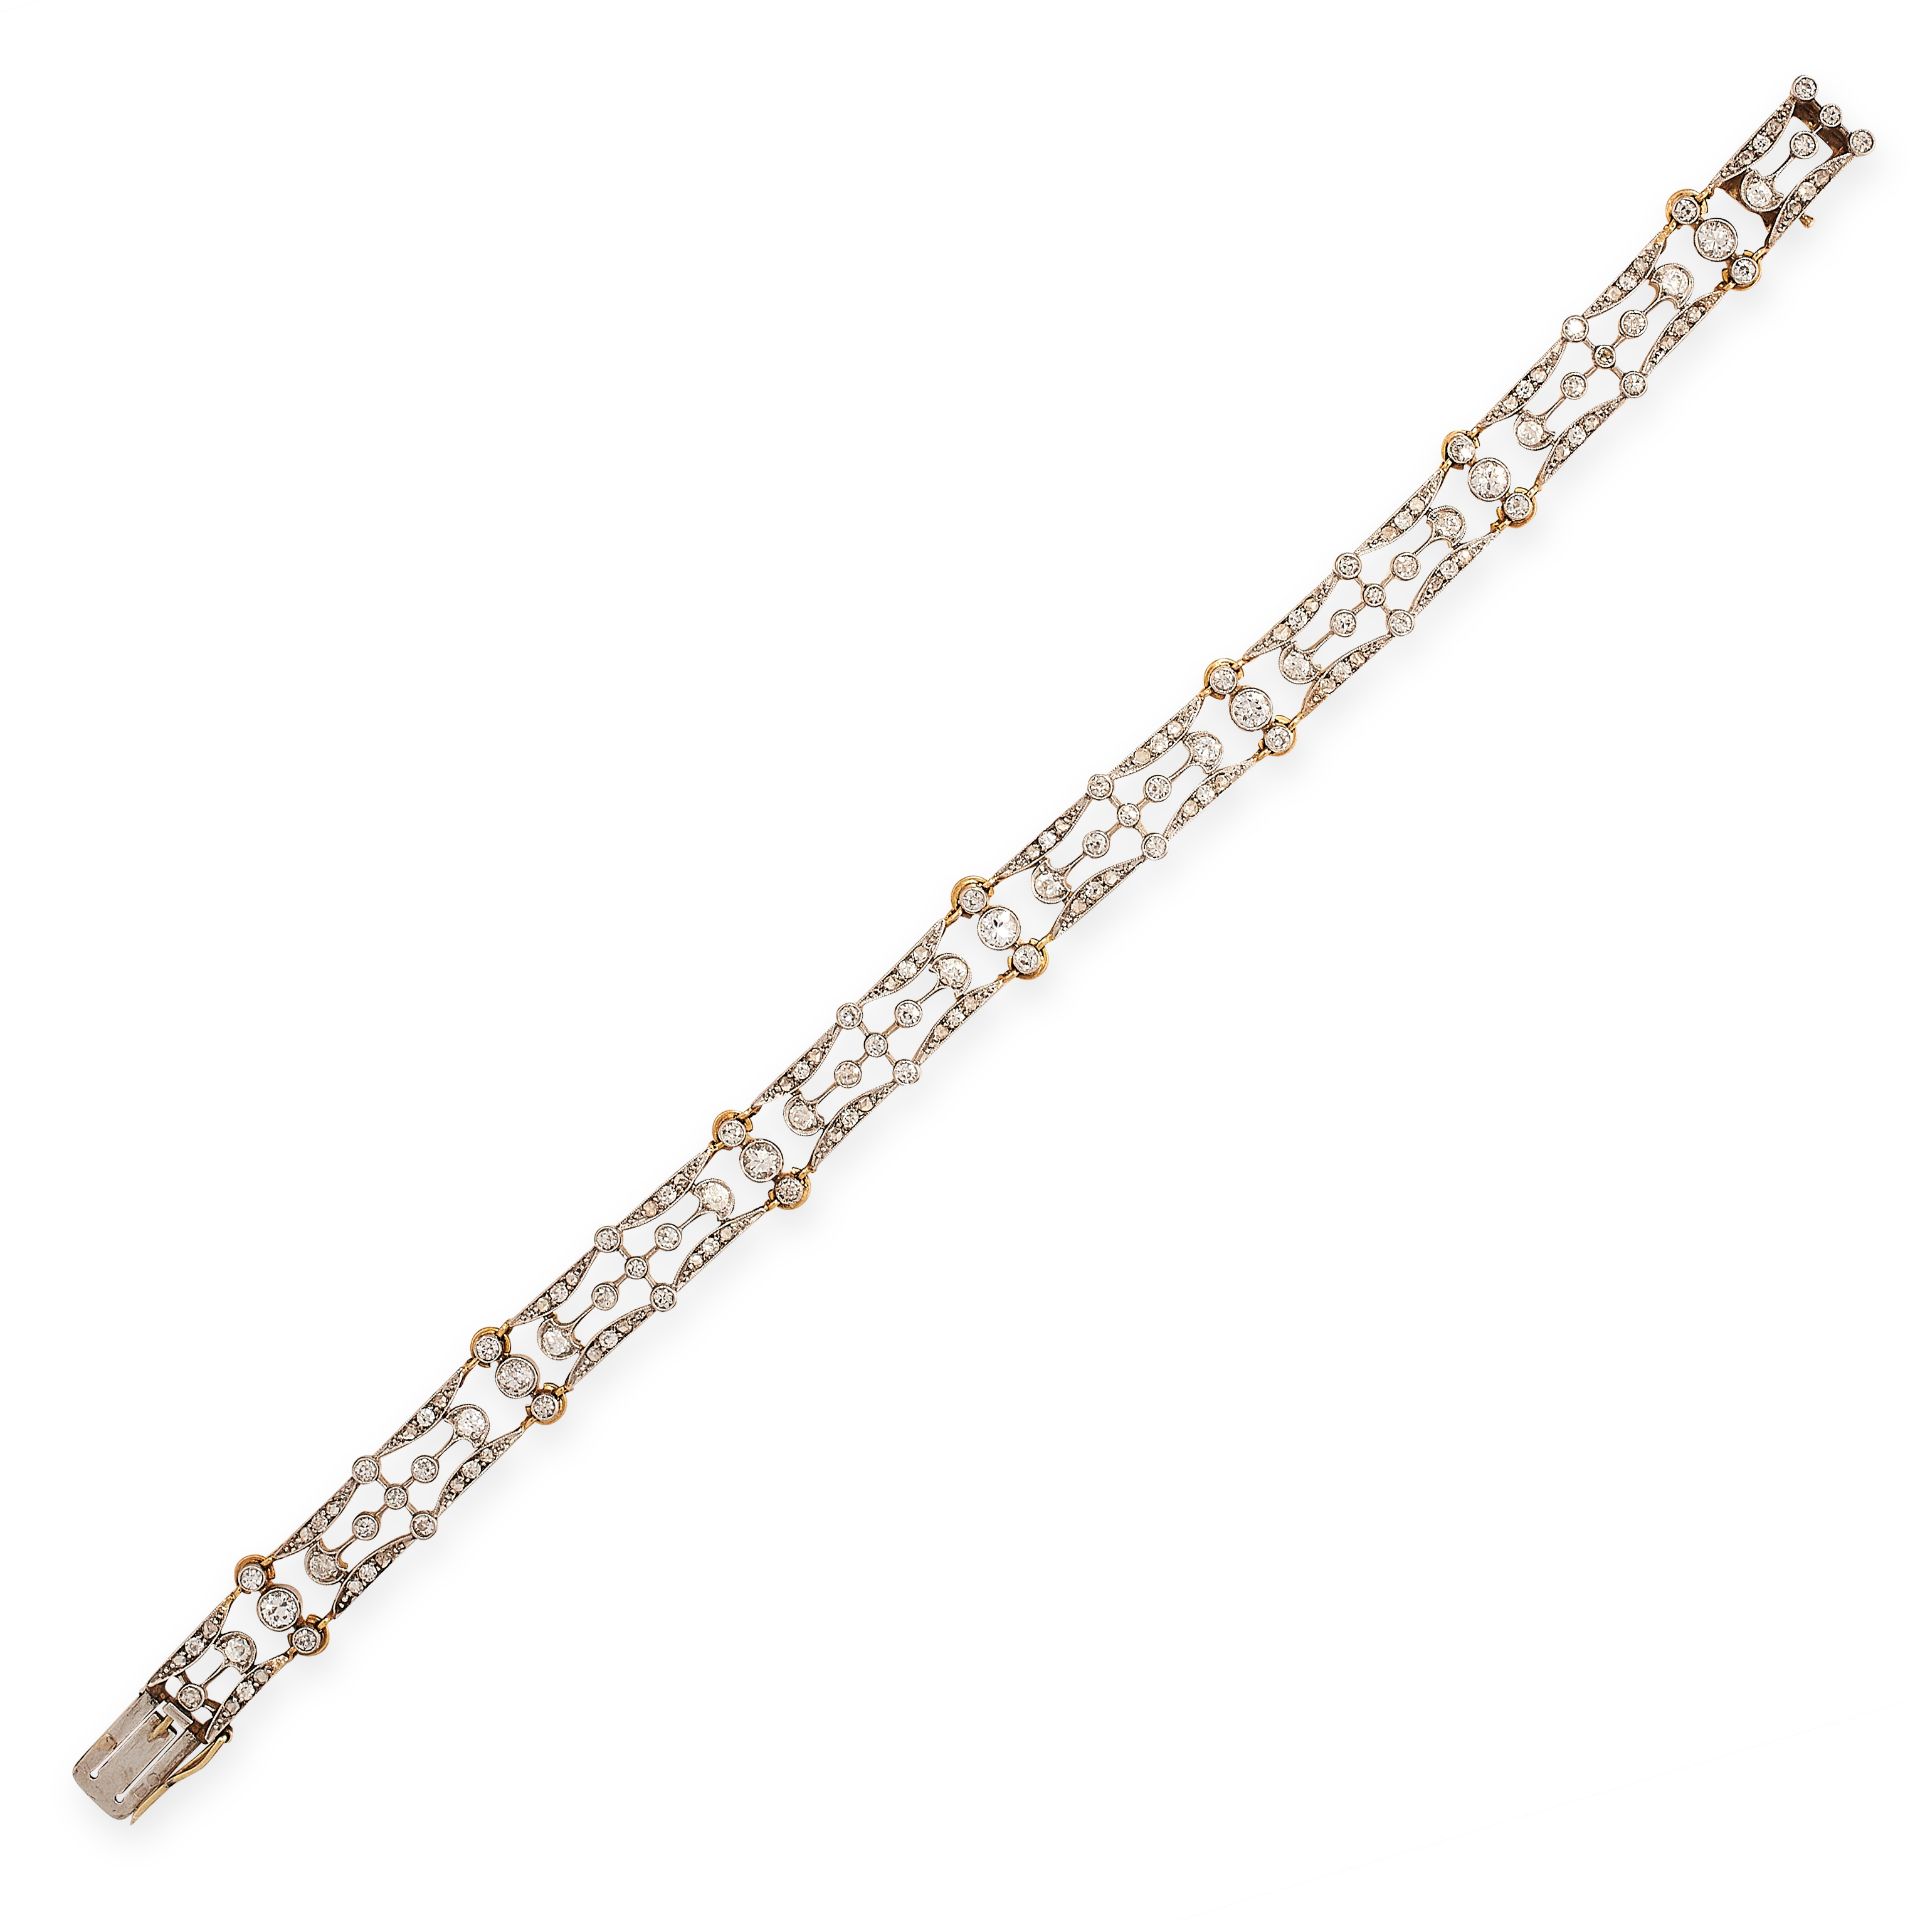 ART DECO DIAMOND BRACELET, EARLY 20TH CENTURY in yellow gold and platinum, formed of bevelled